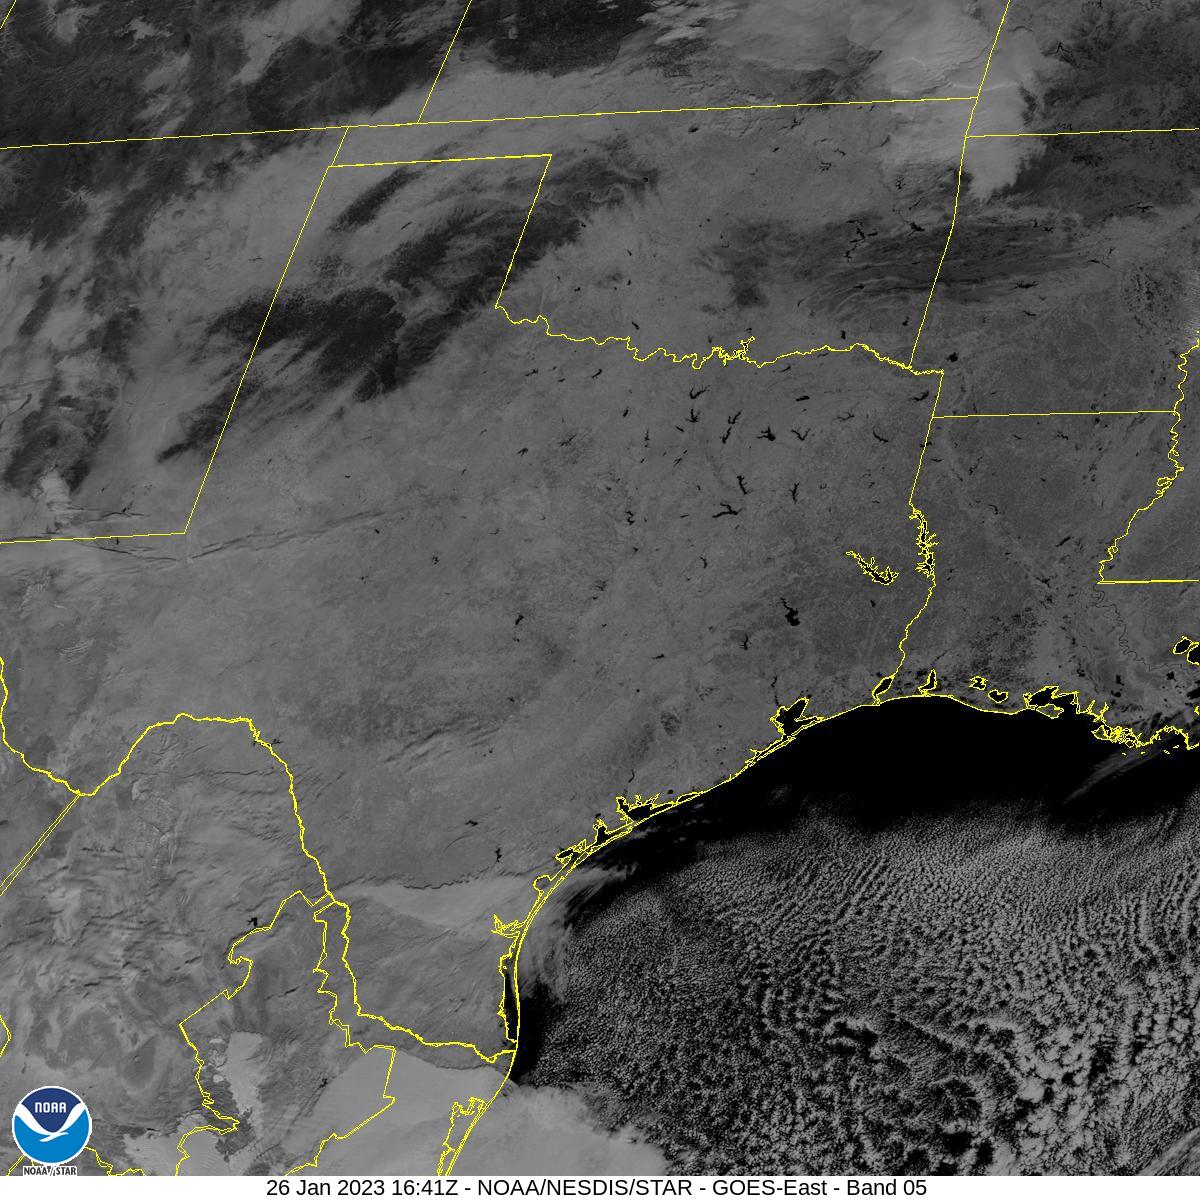 Band 5 1.6 Î¼m Snow/Ice Near IR Satellite Image of the Southern U.S. Plains Region  at 10:41 am CST on January 26, 2023